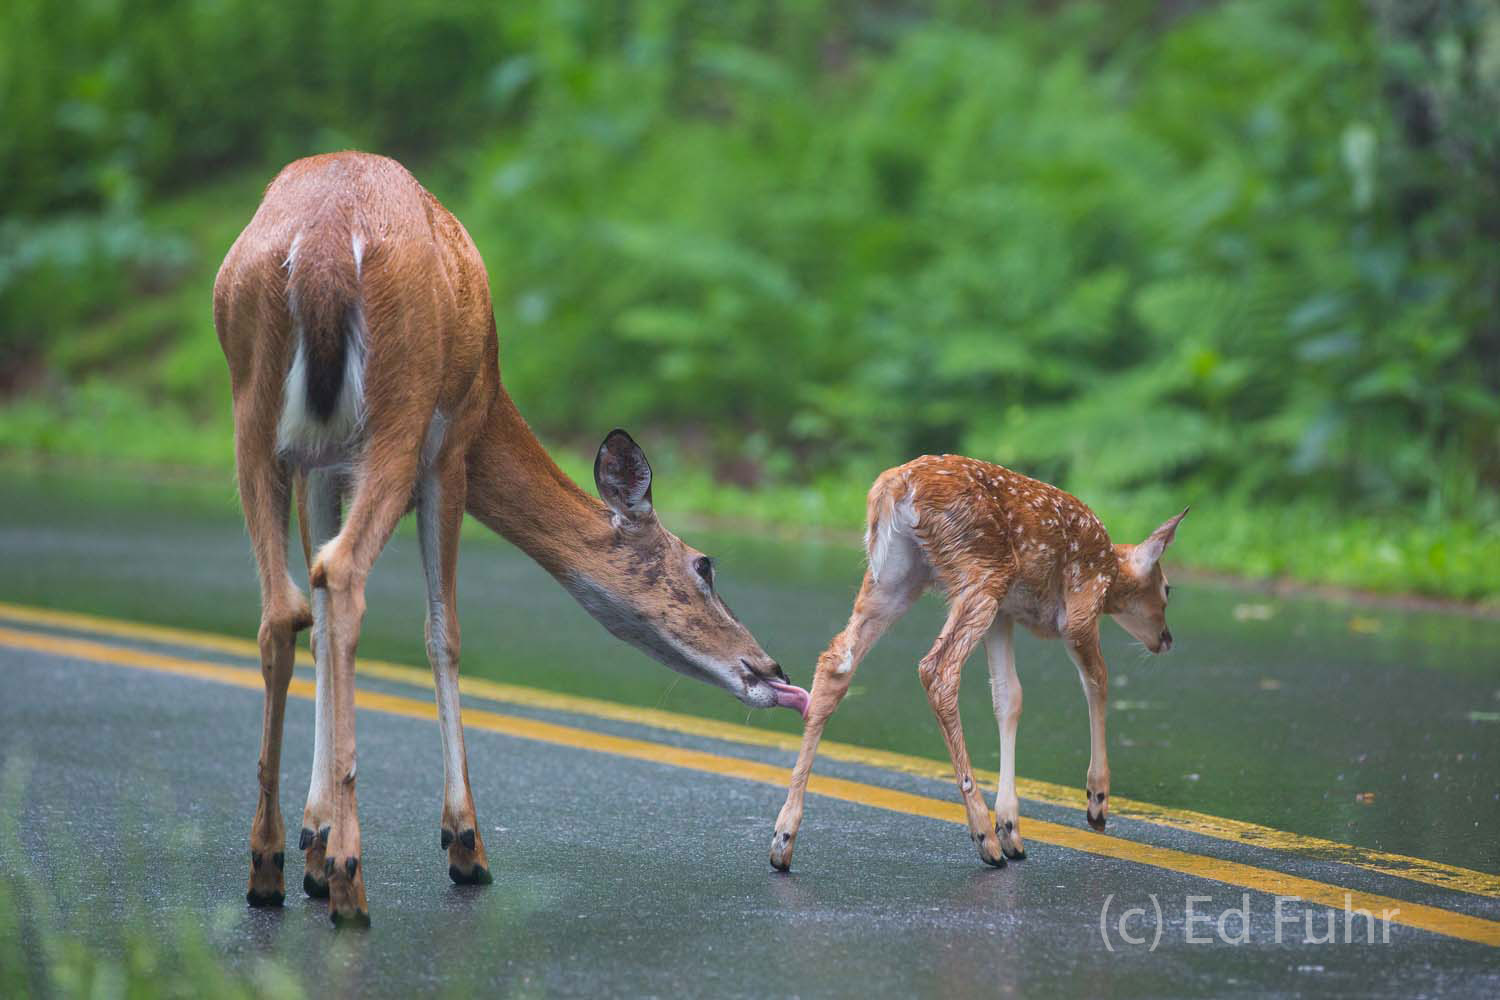 A doe cleans her fawn as they make their way across a rainy Skyline Drive.